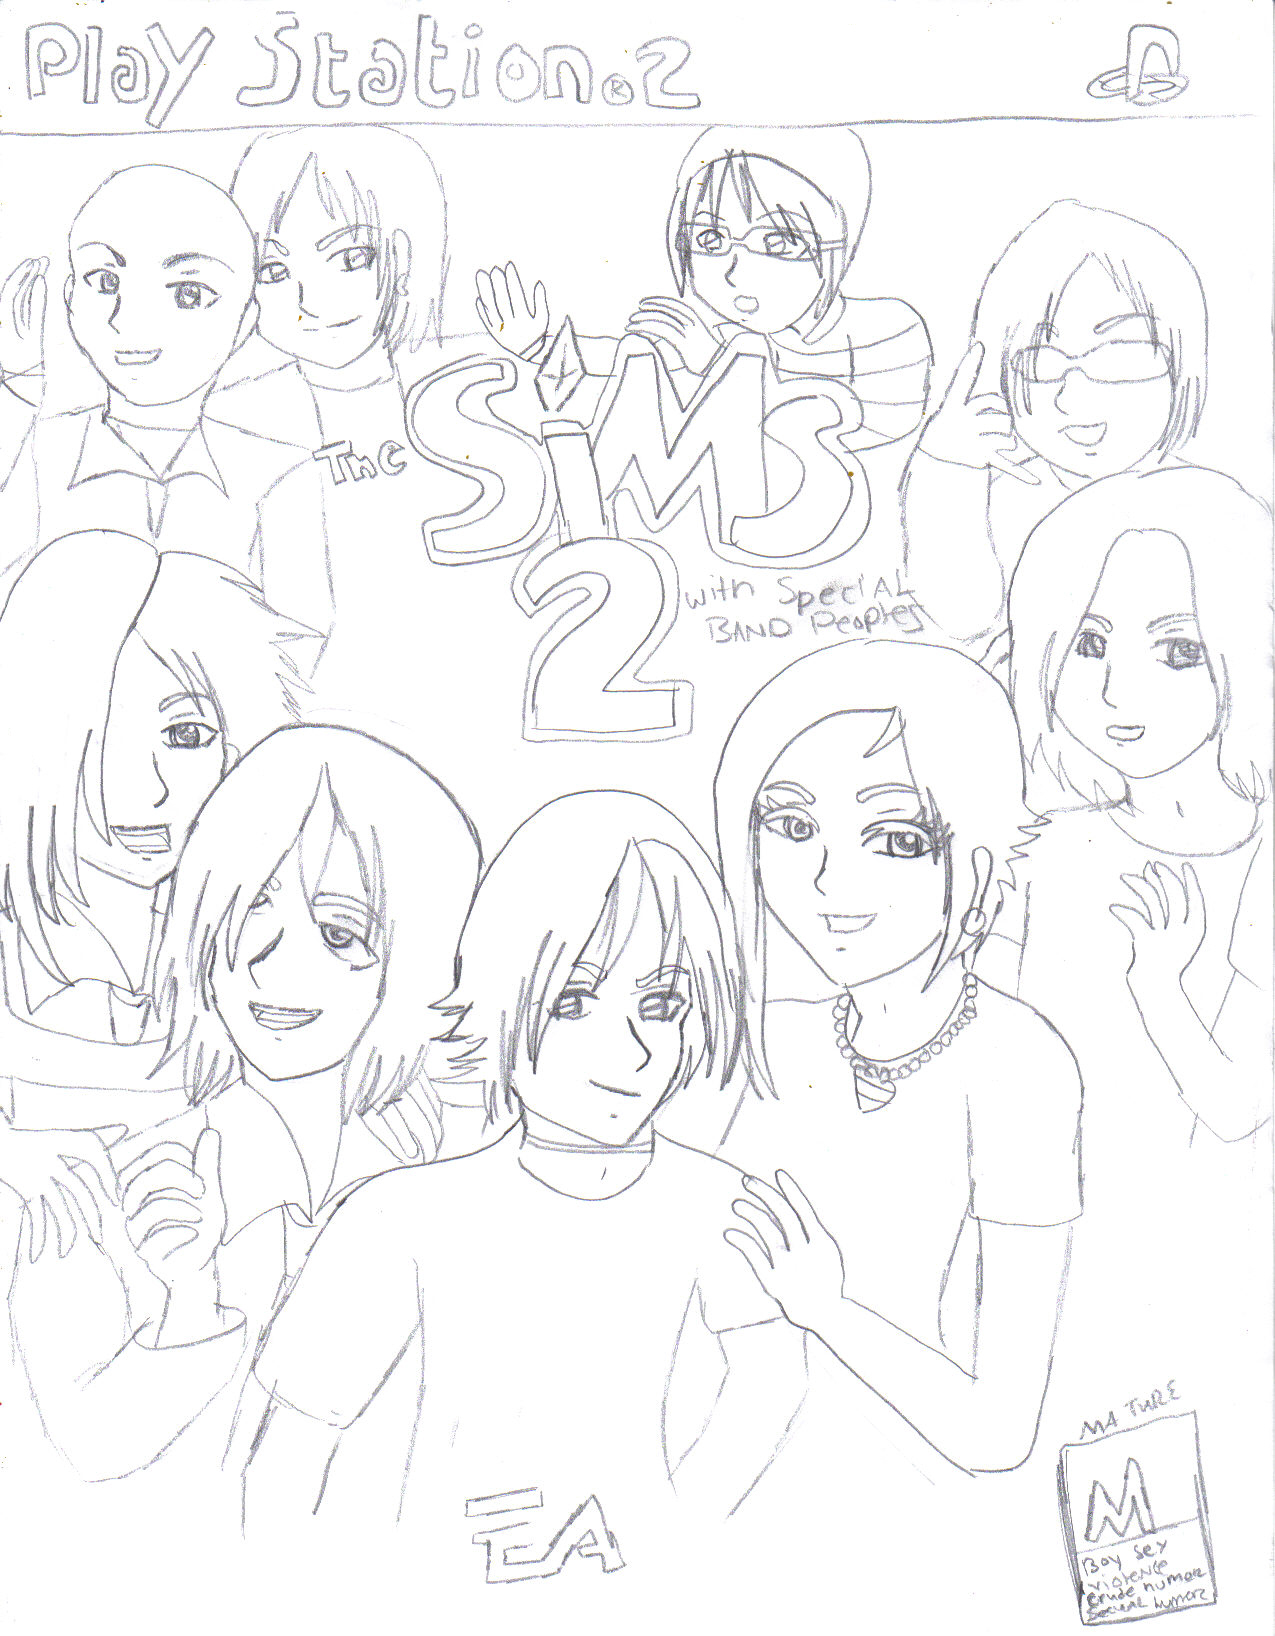 The Sims 2 (with special band people) by gerard_frankie_lvr